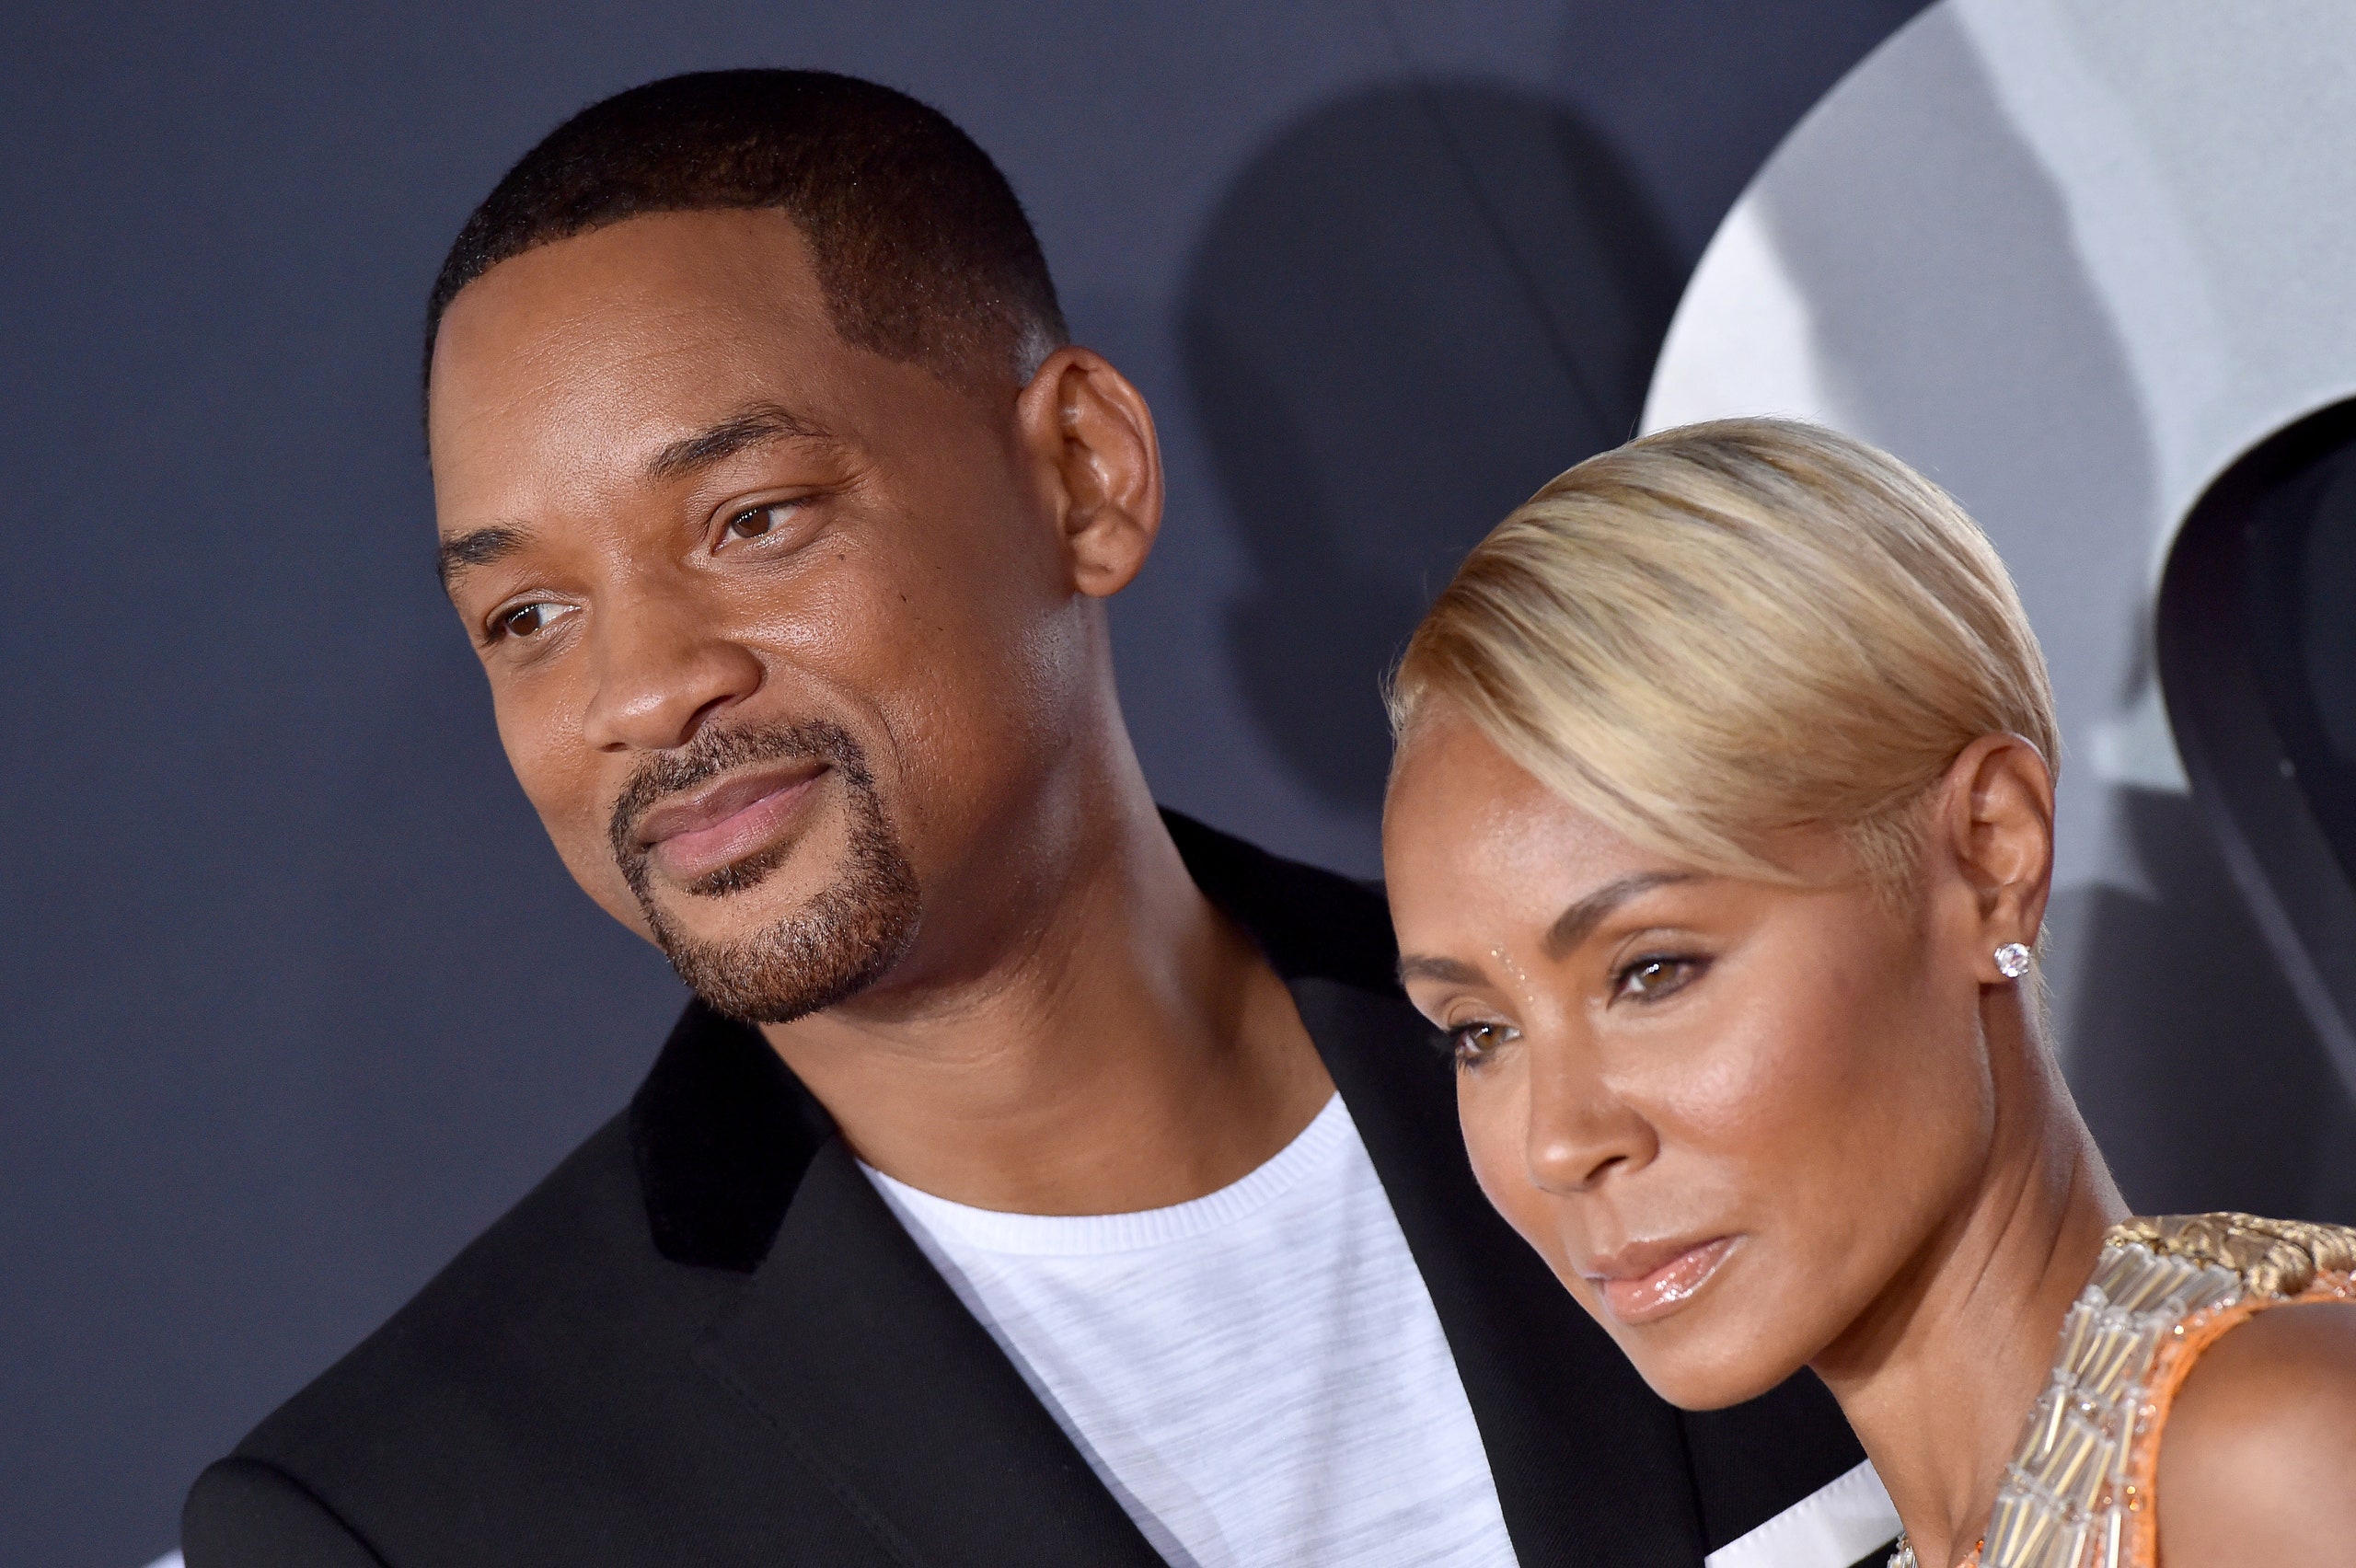 Will Smith and Jada Pinkett Smith Unconventional Open Marriage! Details Revealed